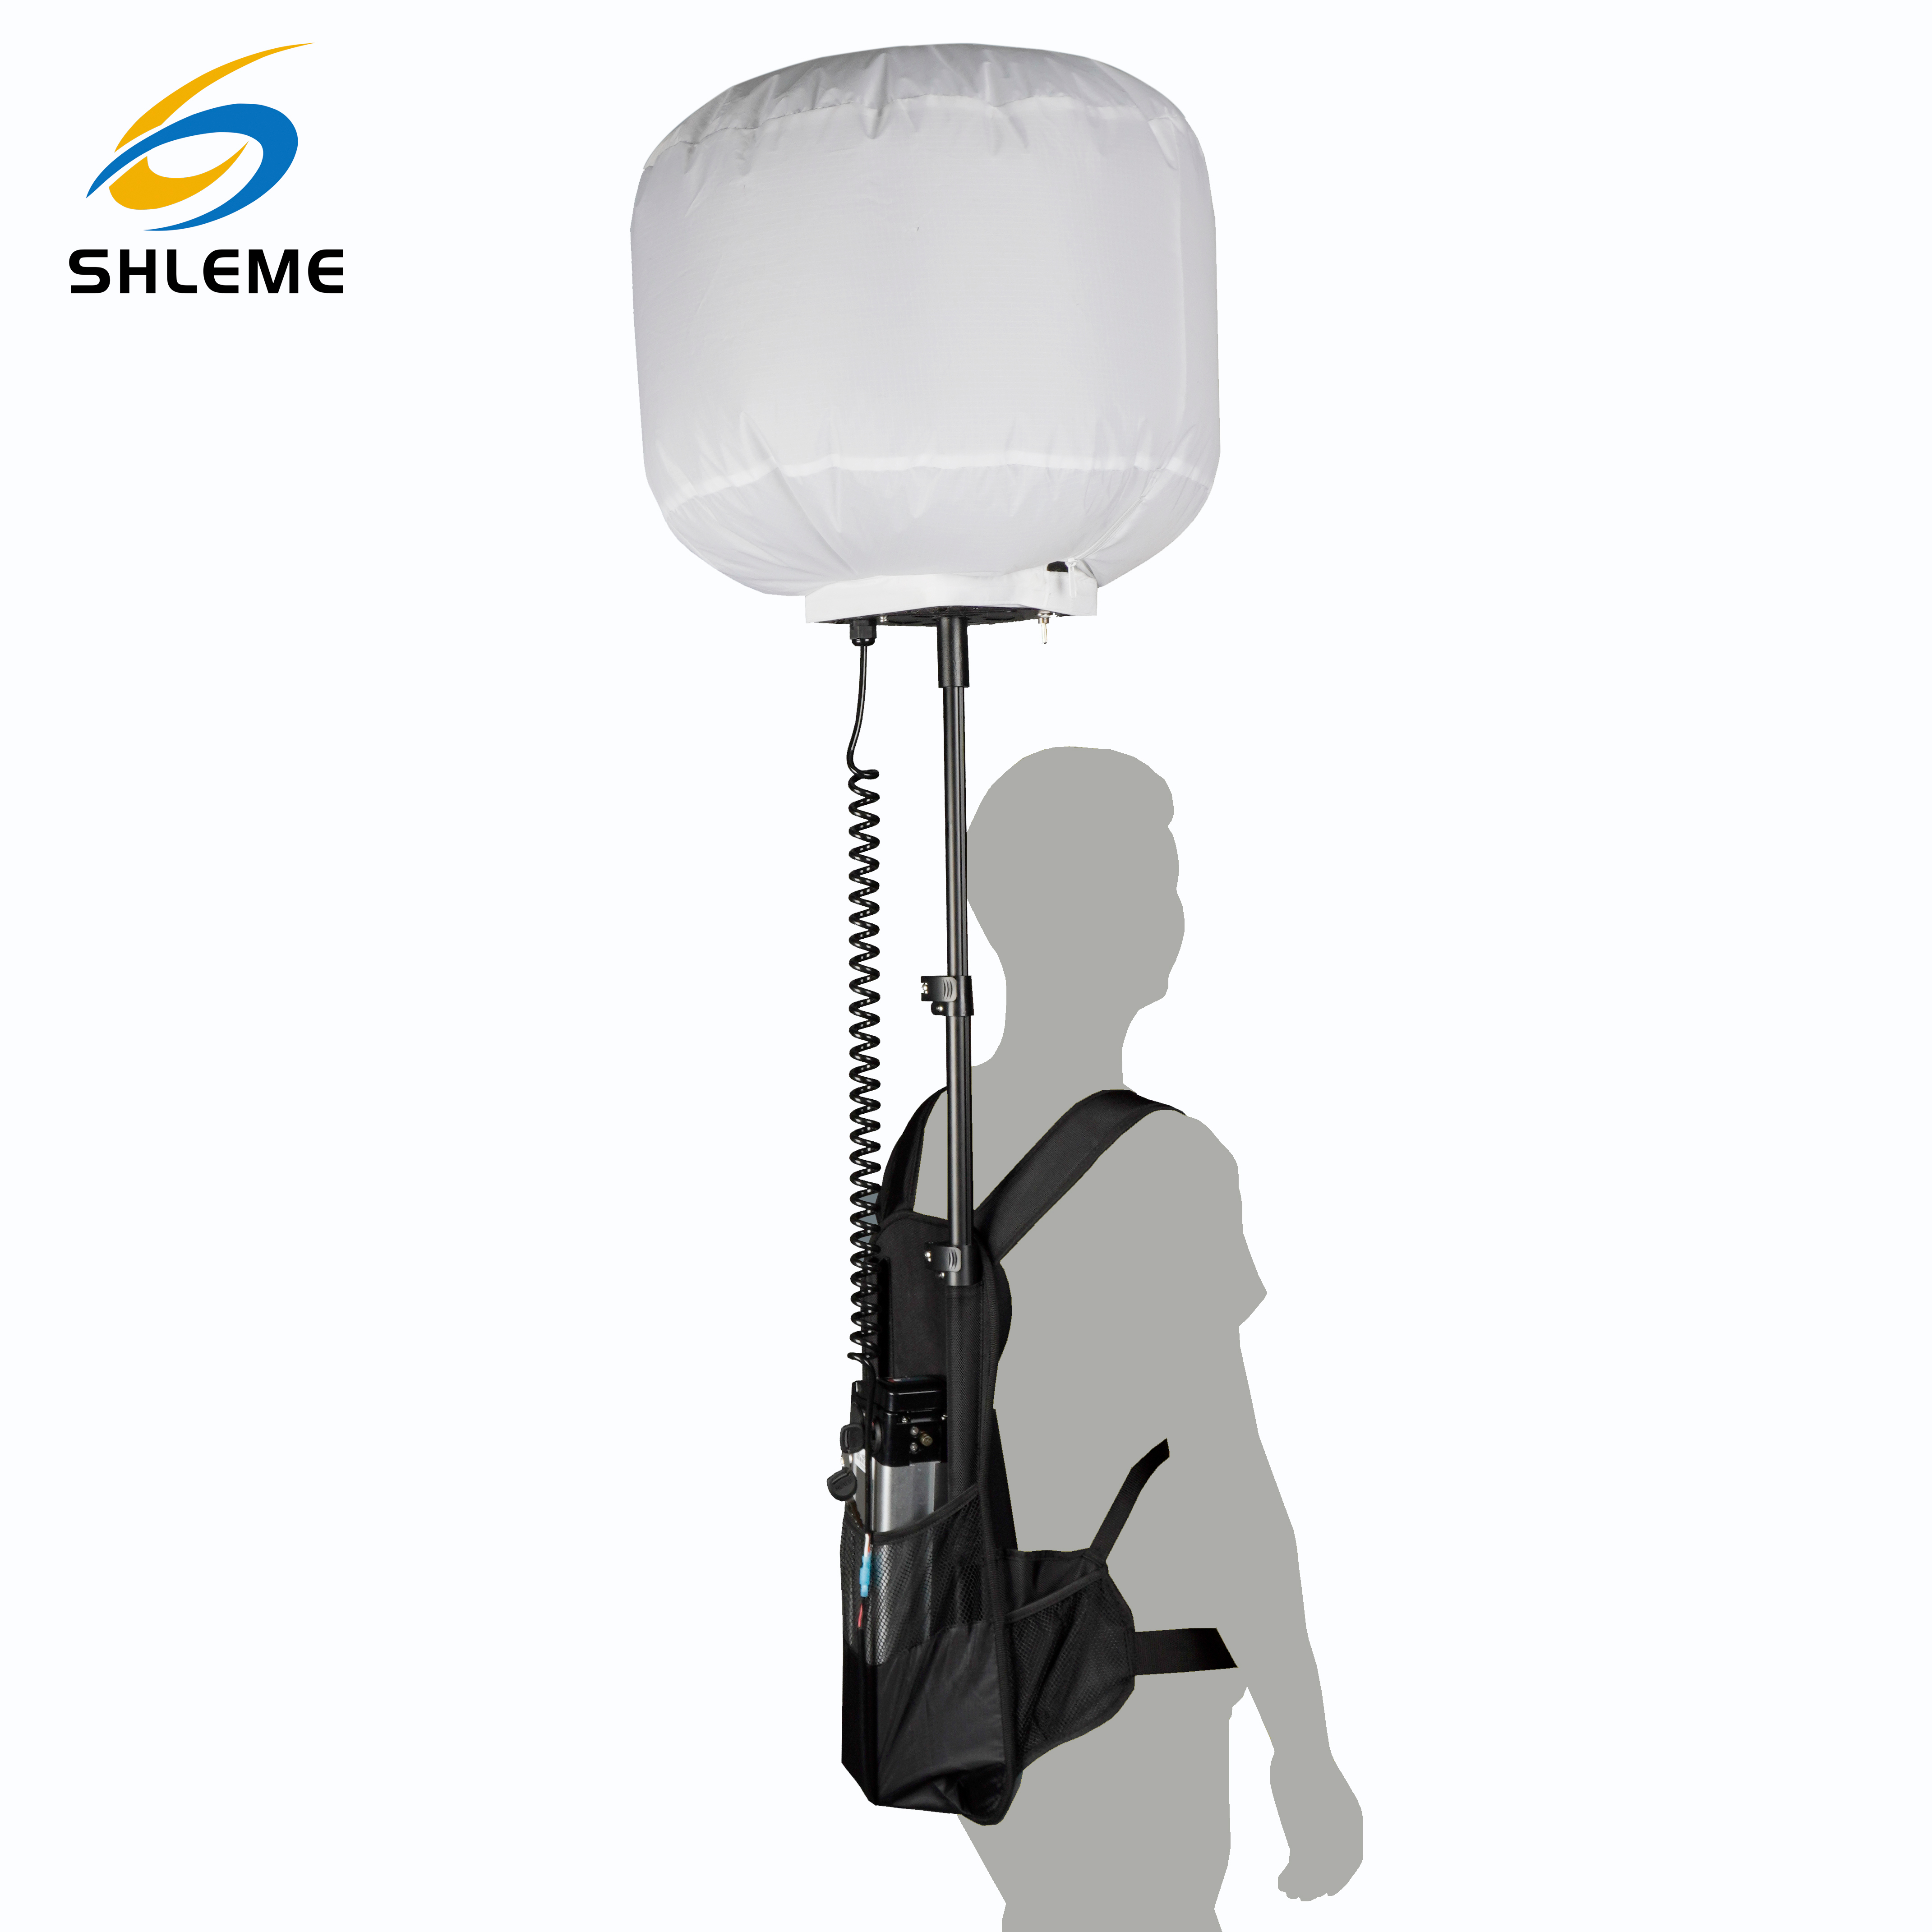 Welcome Shlemes new product ：Backpack Light tower!(图1)